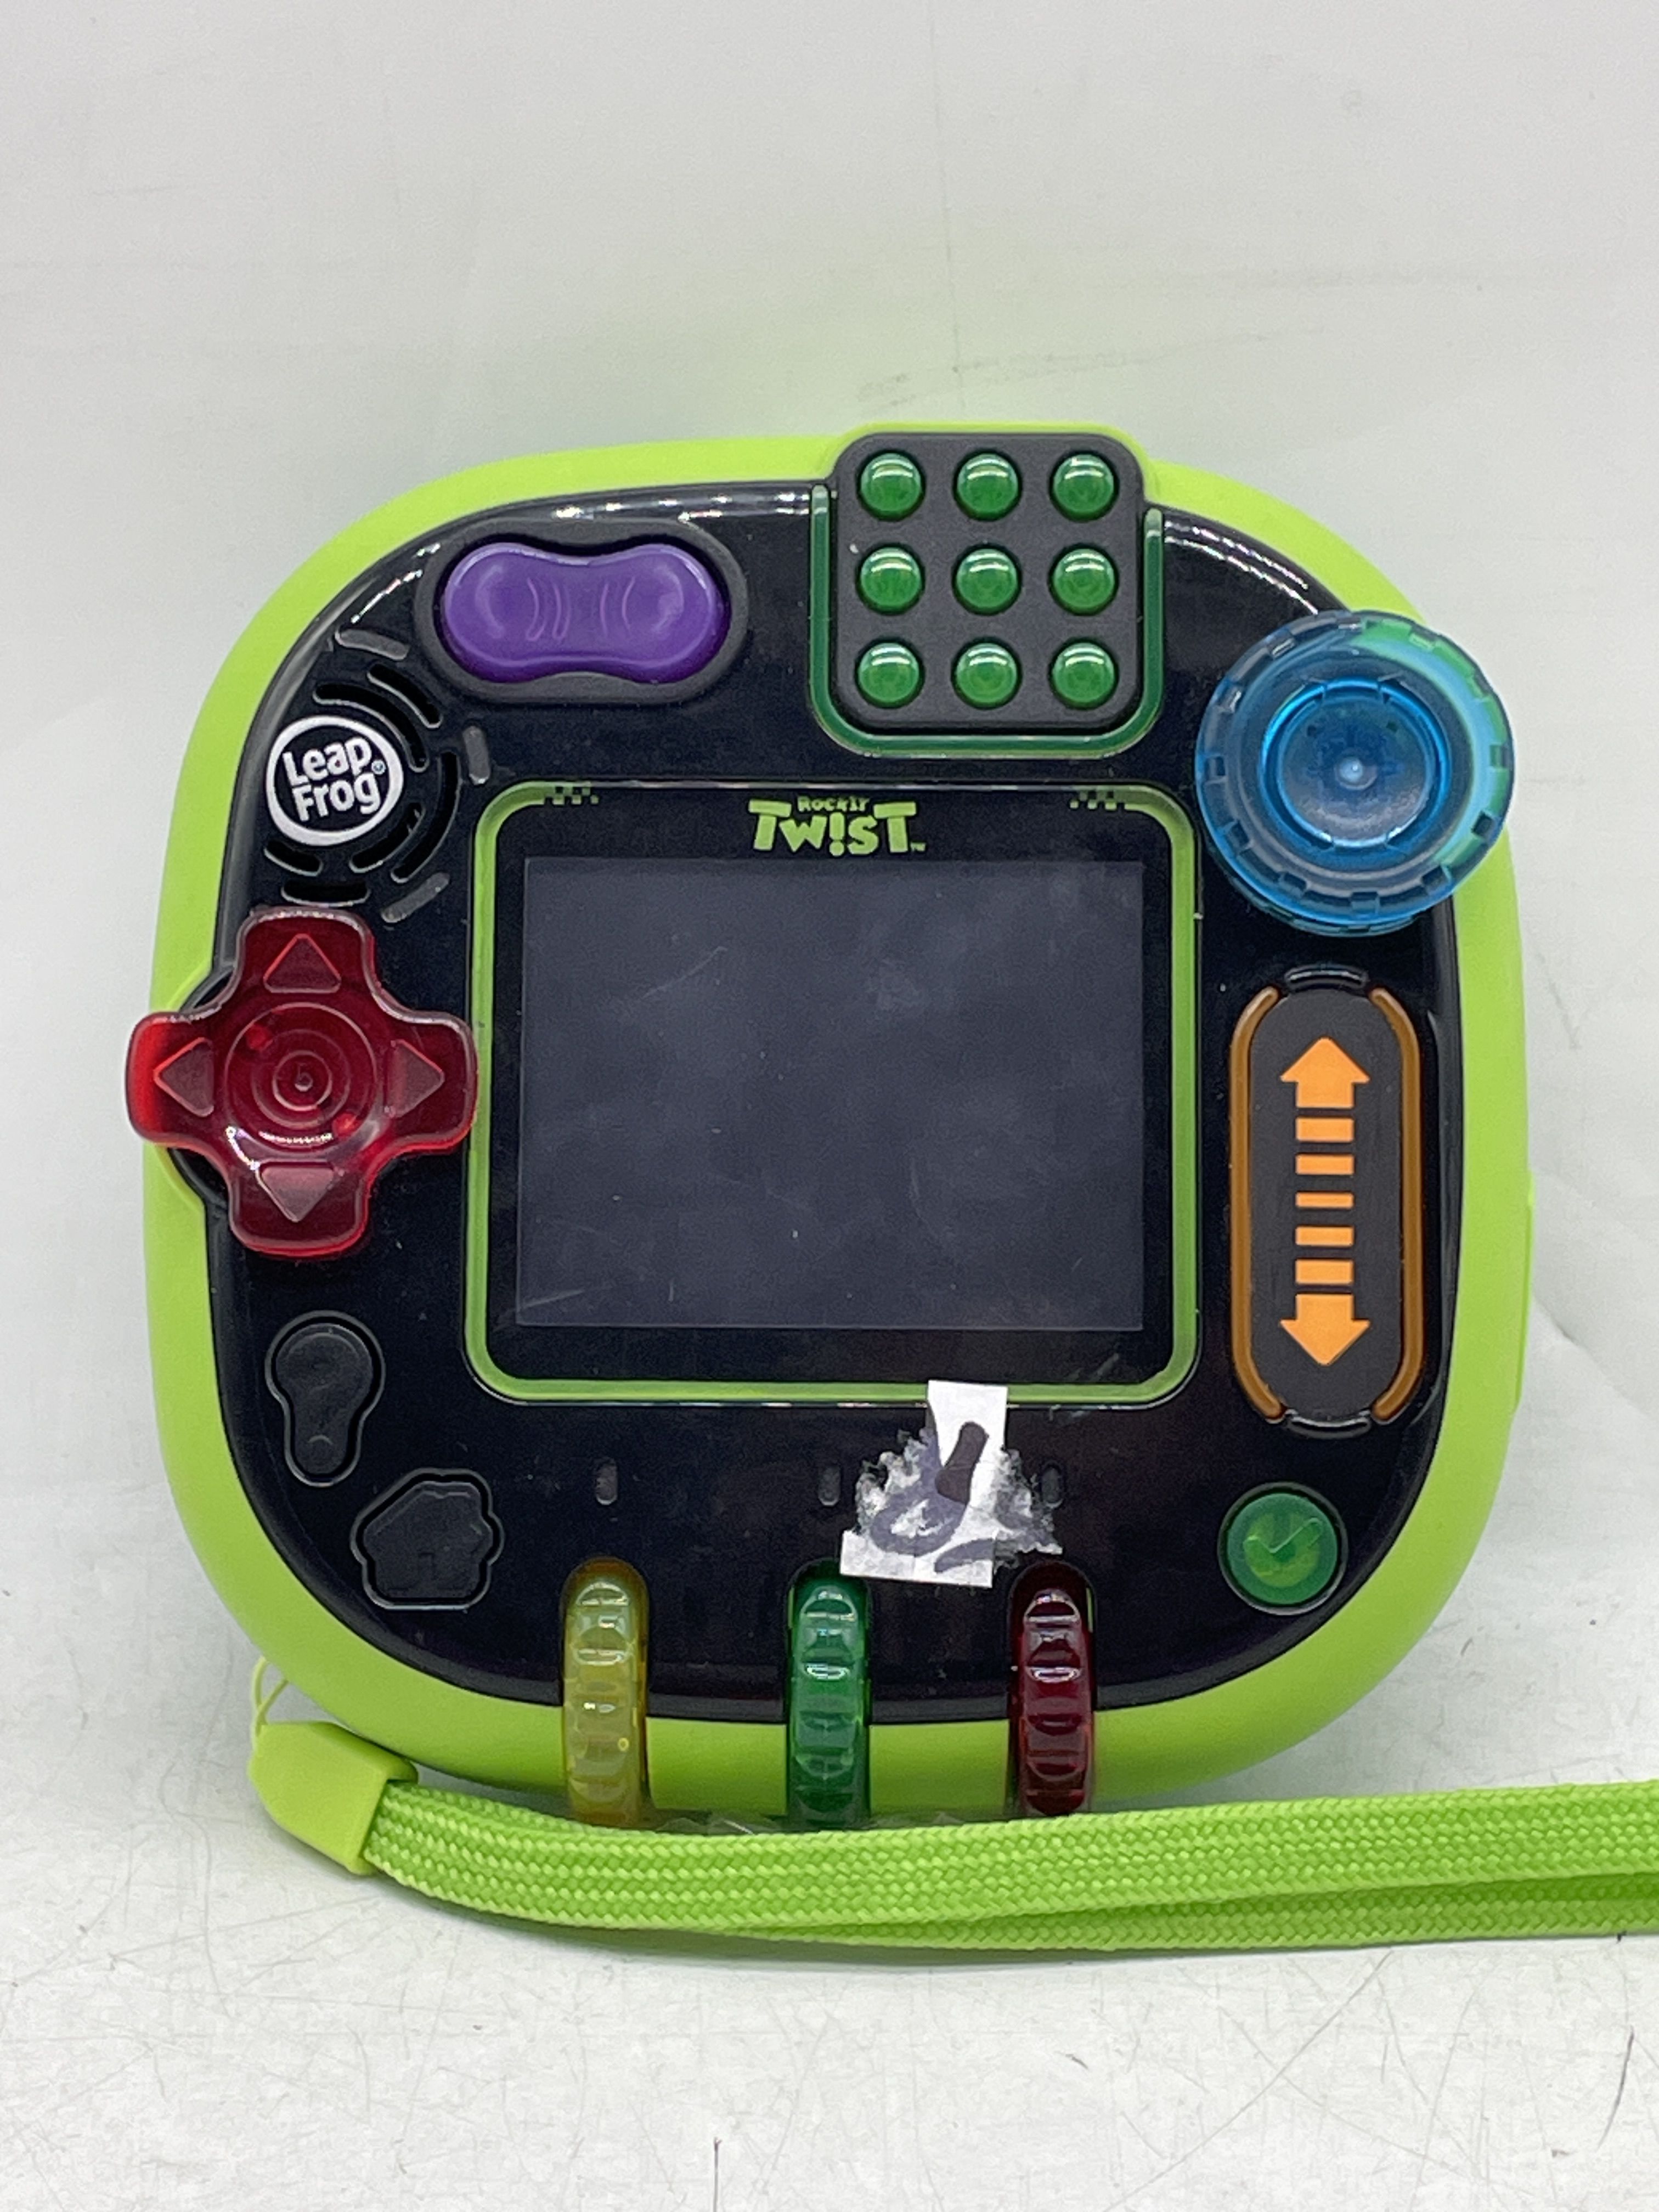 Buy the Leapfrog RockIt Twist Green Handheld Learning Gaming System  E-0488930-L